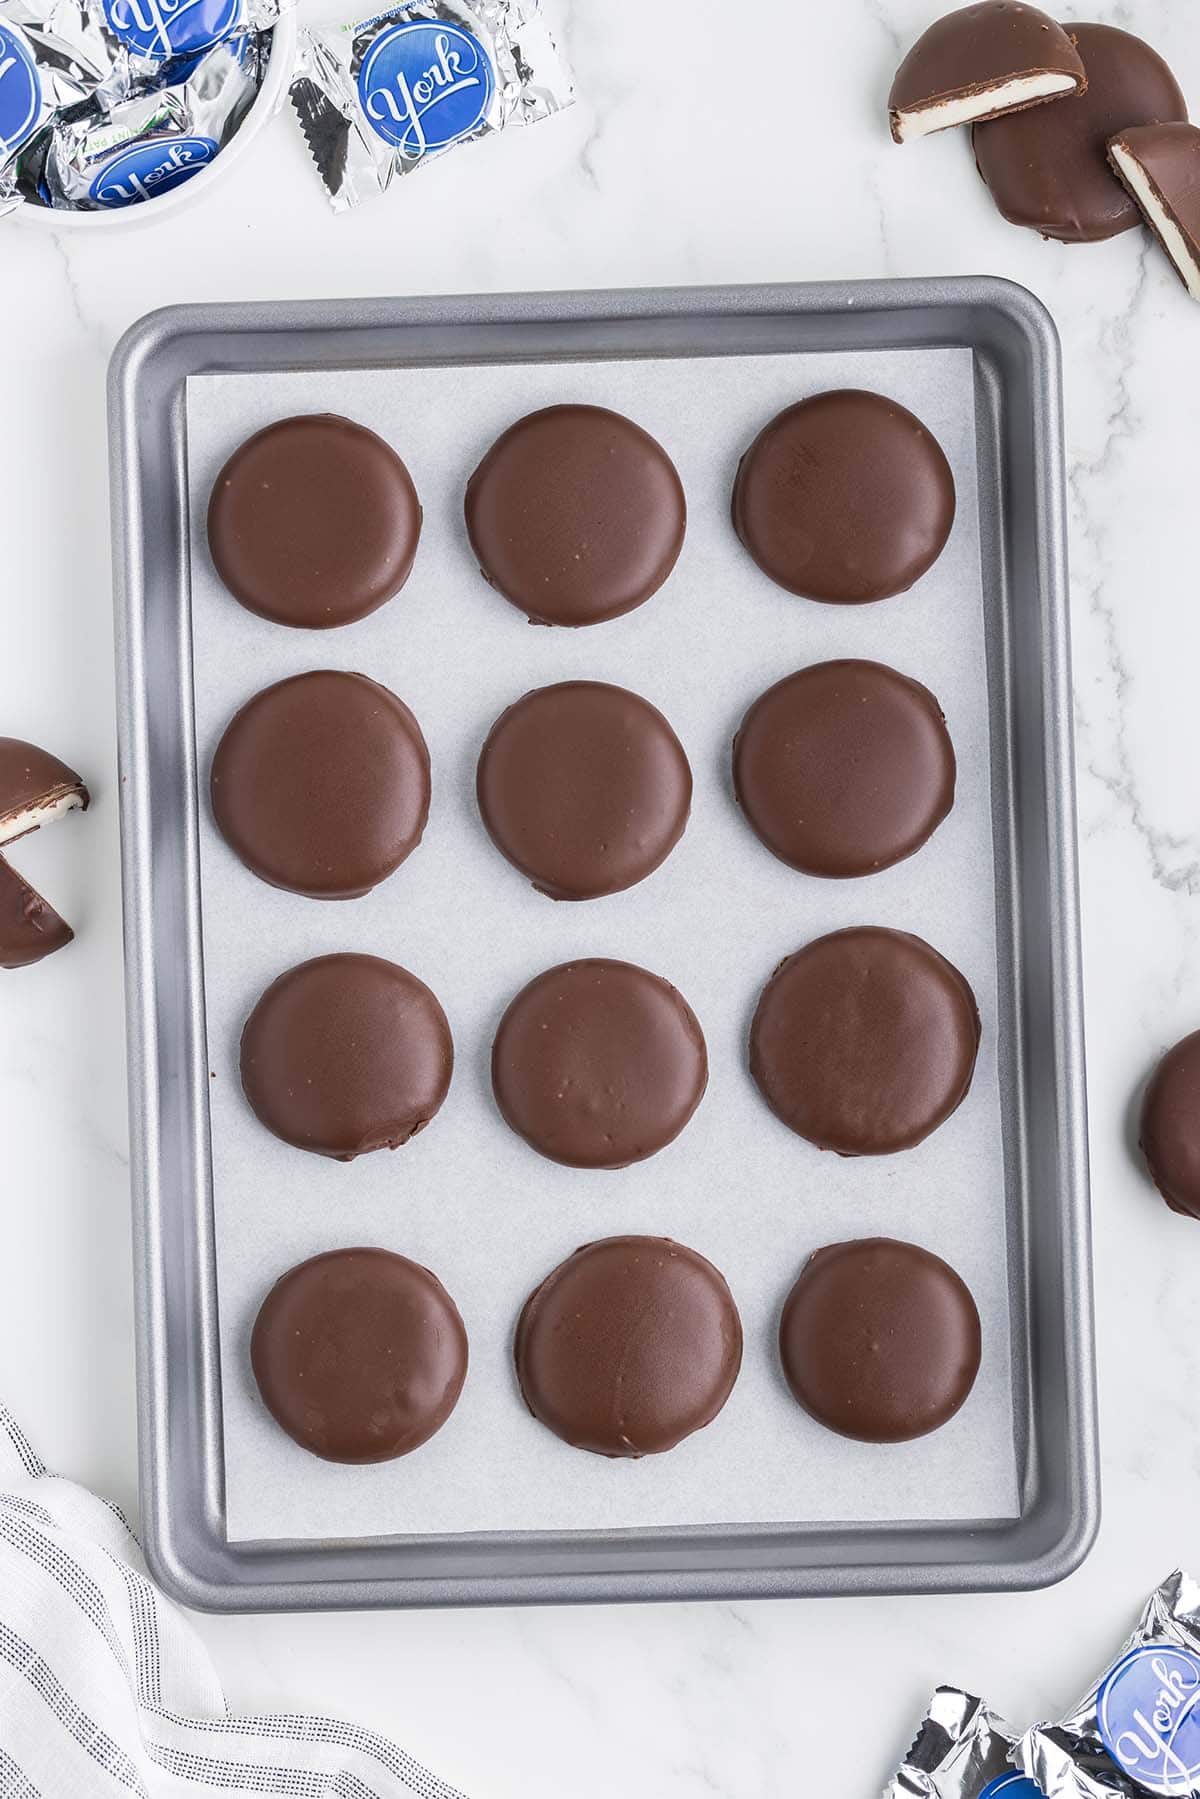 peppermint patties coated with melted chocolate on baking sheet.